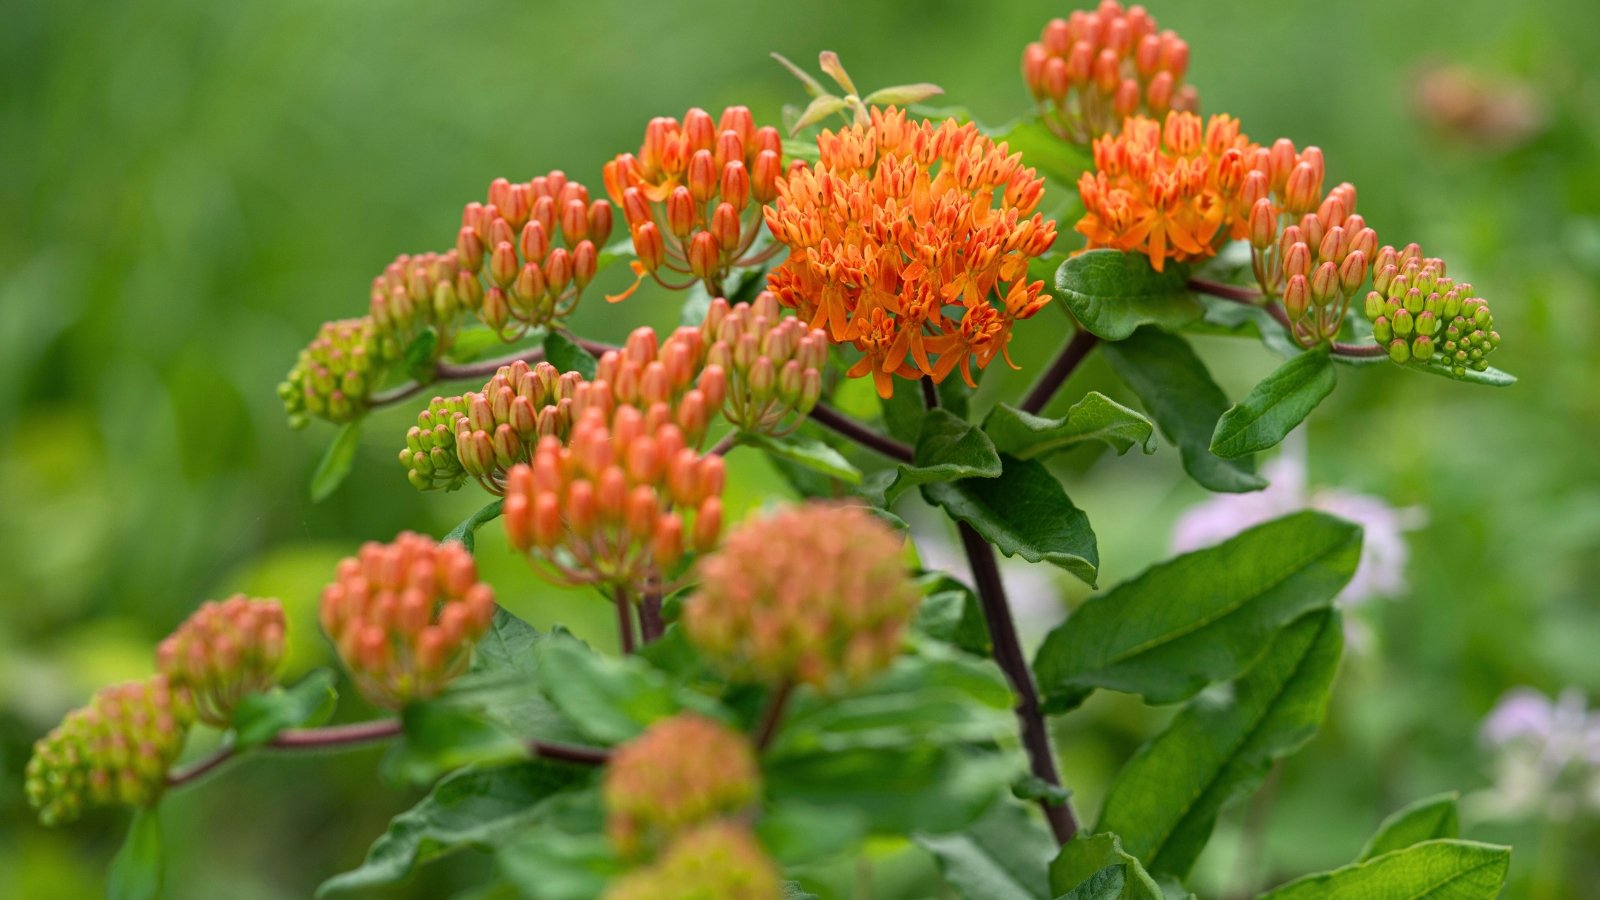 Asclepias tuberosa features stout stems and lanceolate leaves, bearing clusters of bright orange, butterfly-attracting flowers.